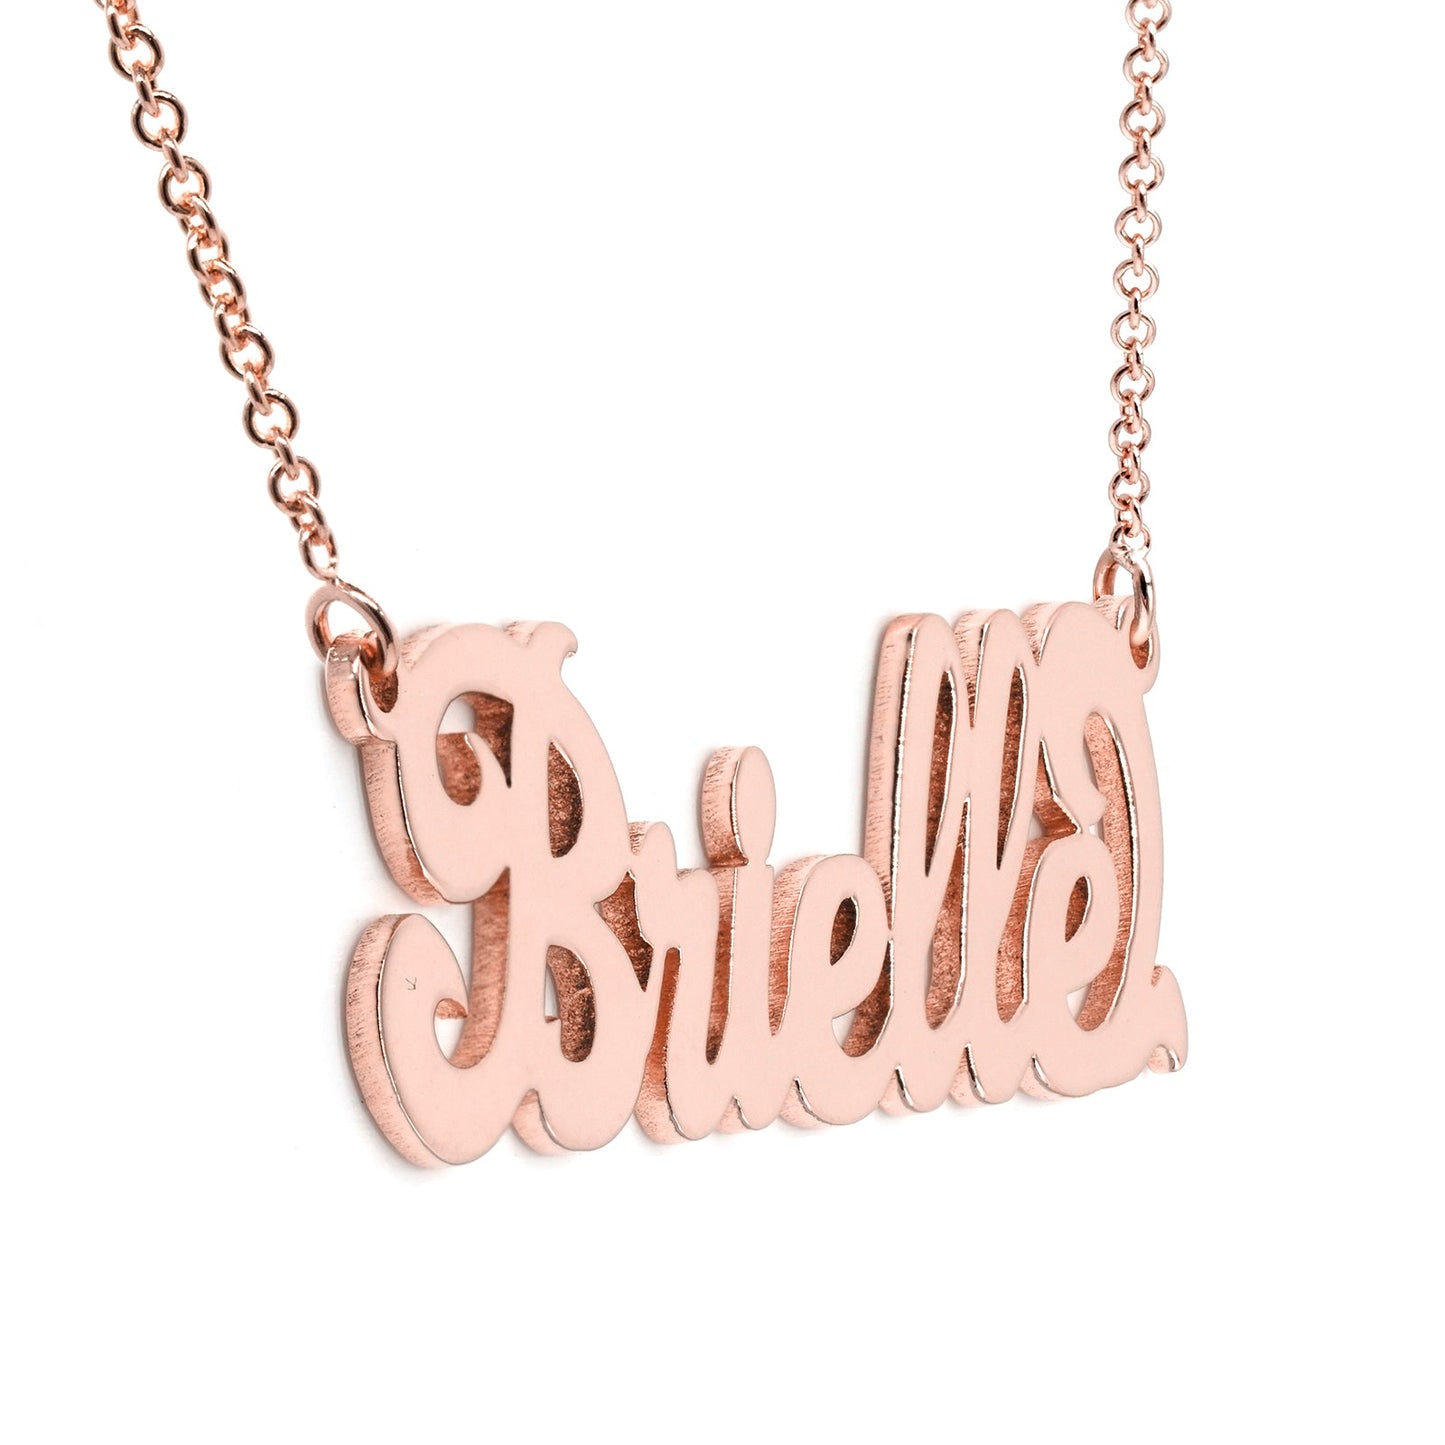 Personalized Sterling Silver Script Text Nameplate Necklace | Extra Thick Plate